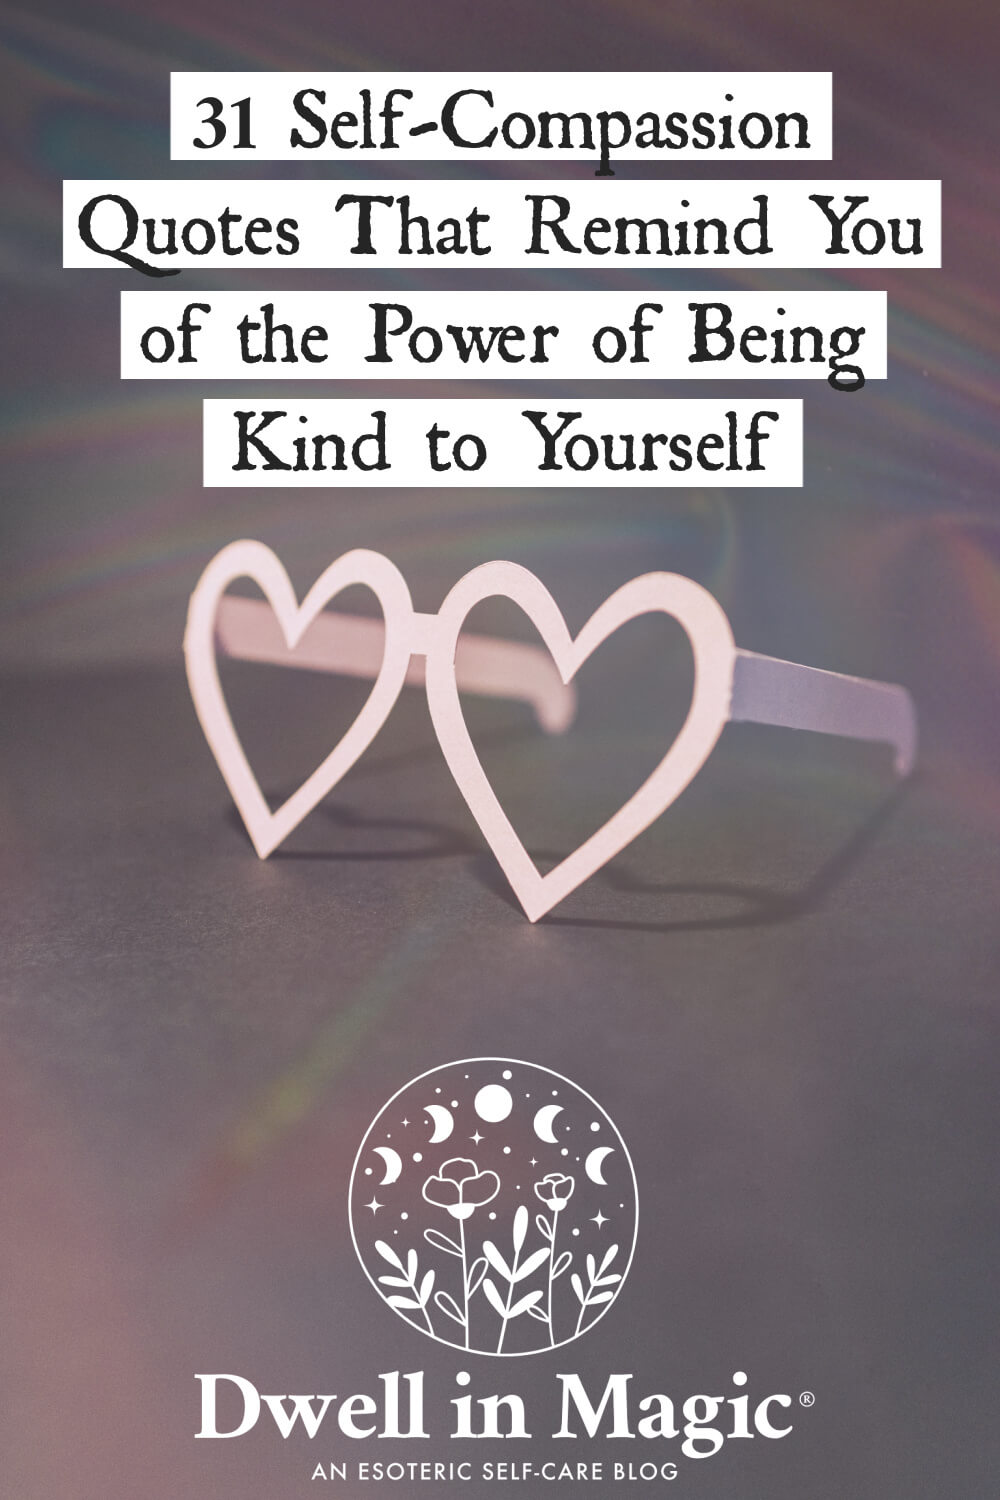 31 Self Compassion Quotes That Remind You of the Power of Being Kind to Yourself